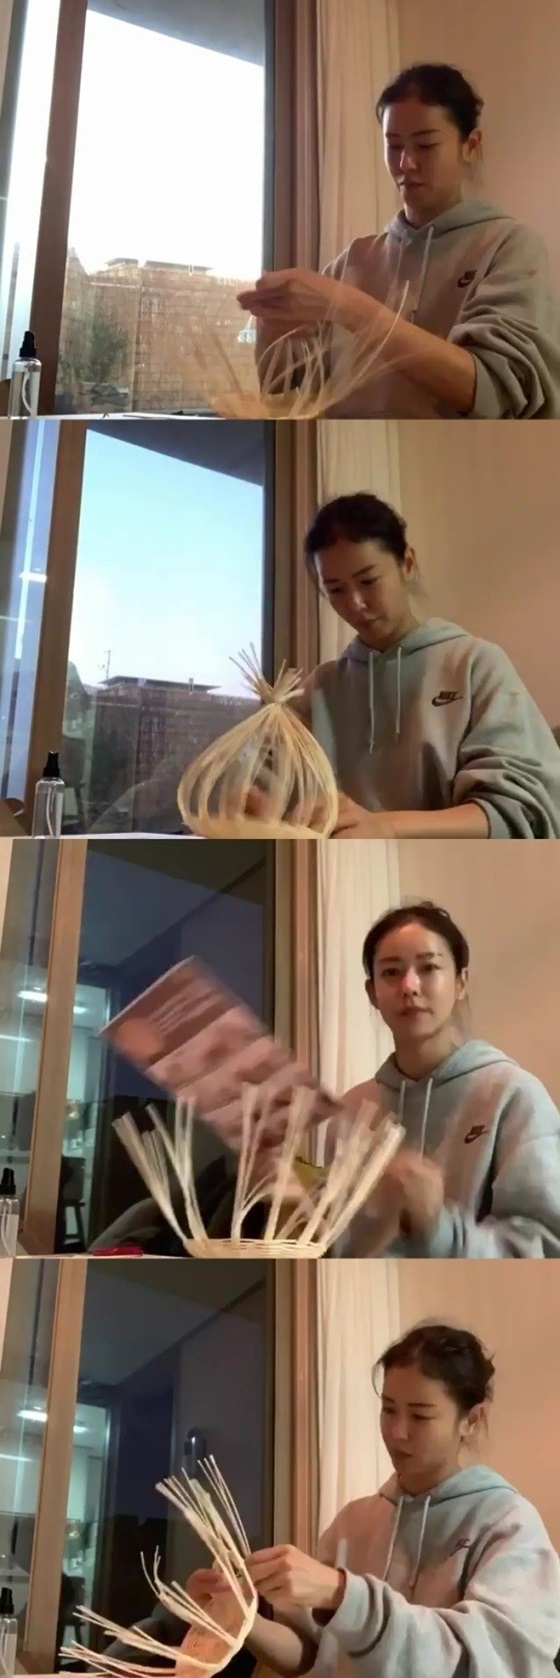 Kyung Soo-jin posted photos and videos on his Instagram on the 8th, along with a short phrase Apple basket (Feat. Lets go).Kyung Soo-jin in the public photos and videos is making apple baskets by concentrating on the tree with a shit head hairstyle in the face.Kyung Soo-jin reveals the natural charm of everyday life such as comfortable clothes and watery skin of gray hoodie and attracts attention.On the other hand, Kyung Soo-jin recently appeared on MBC entertainment program I live alone and got the nickname Kyung Sang-jang